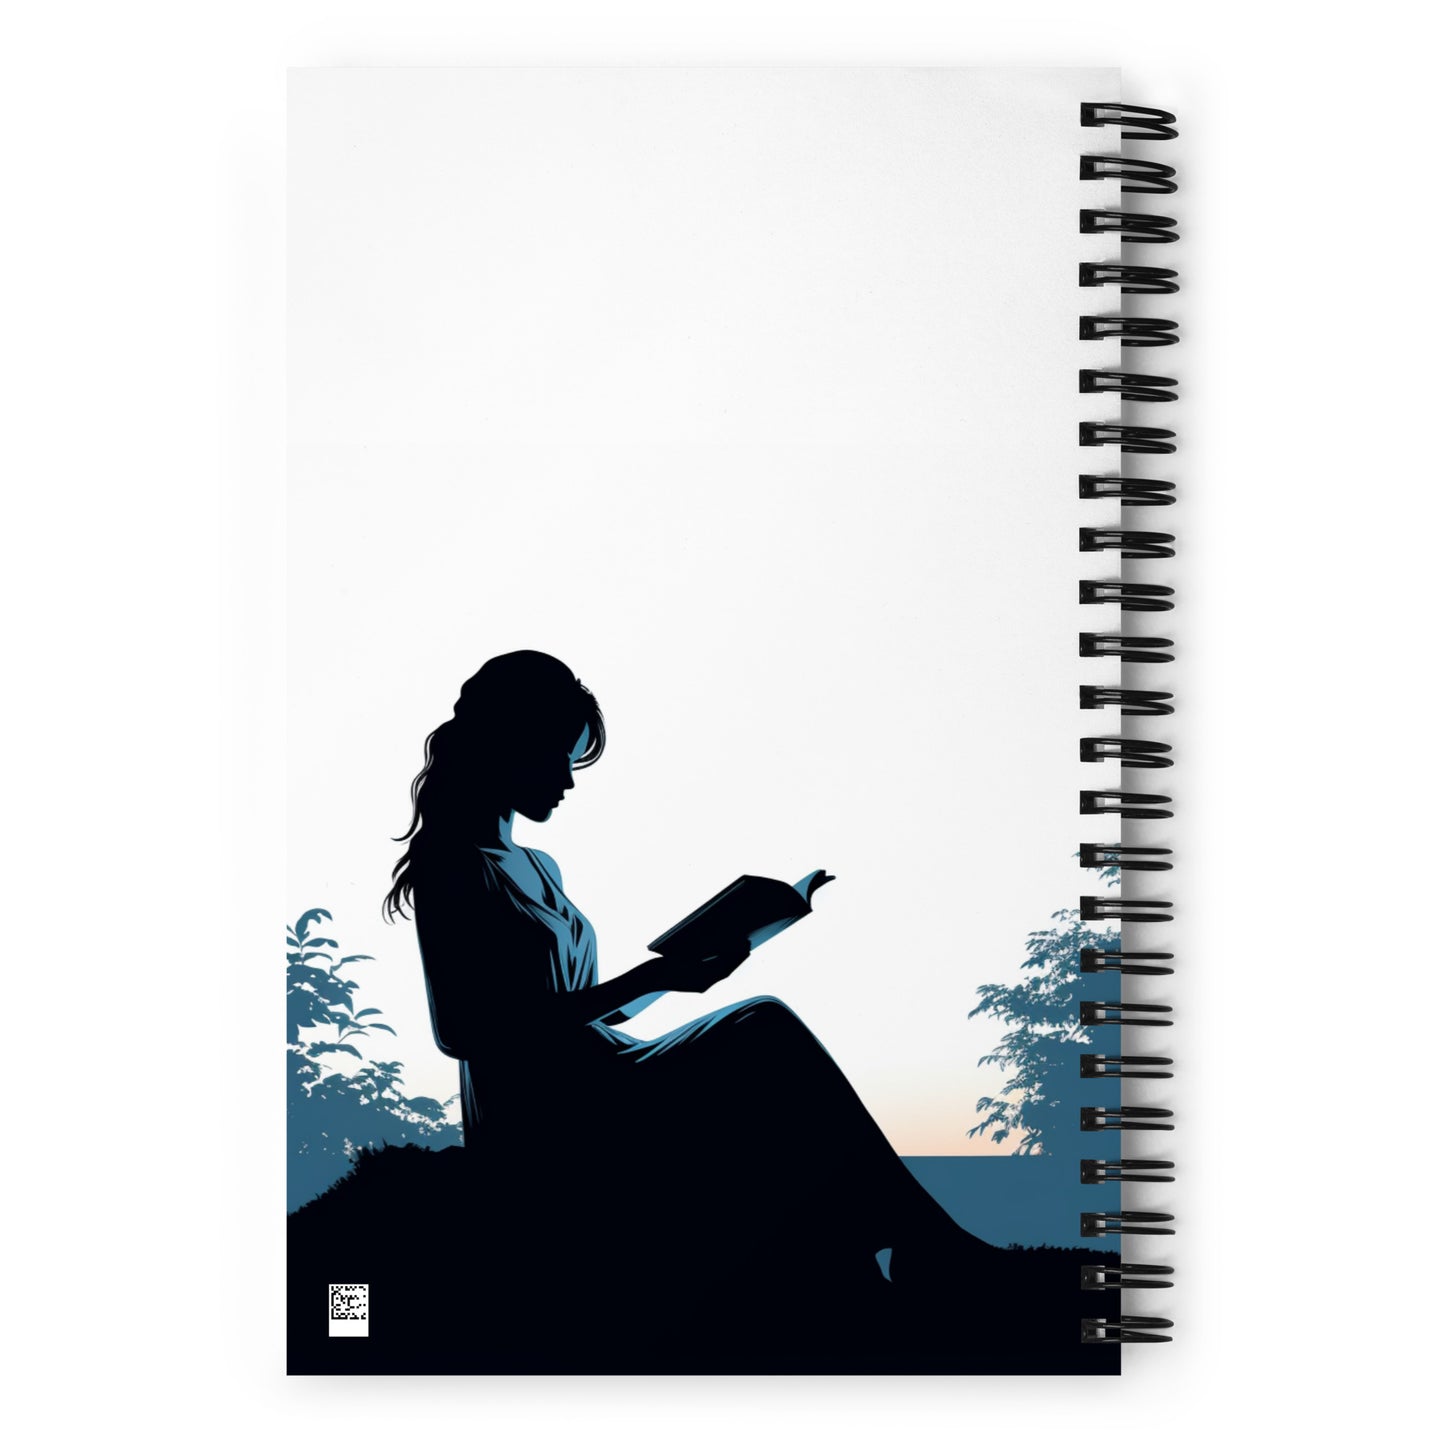 Spiral notebook, Woman Reading